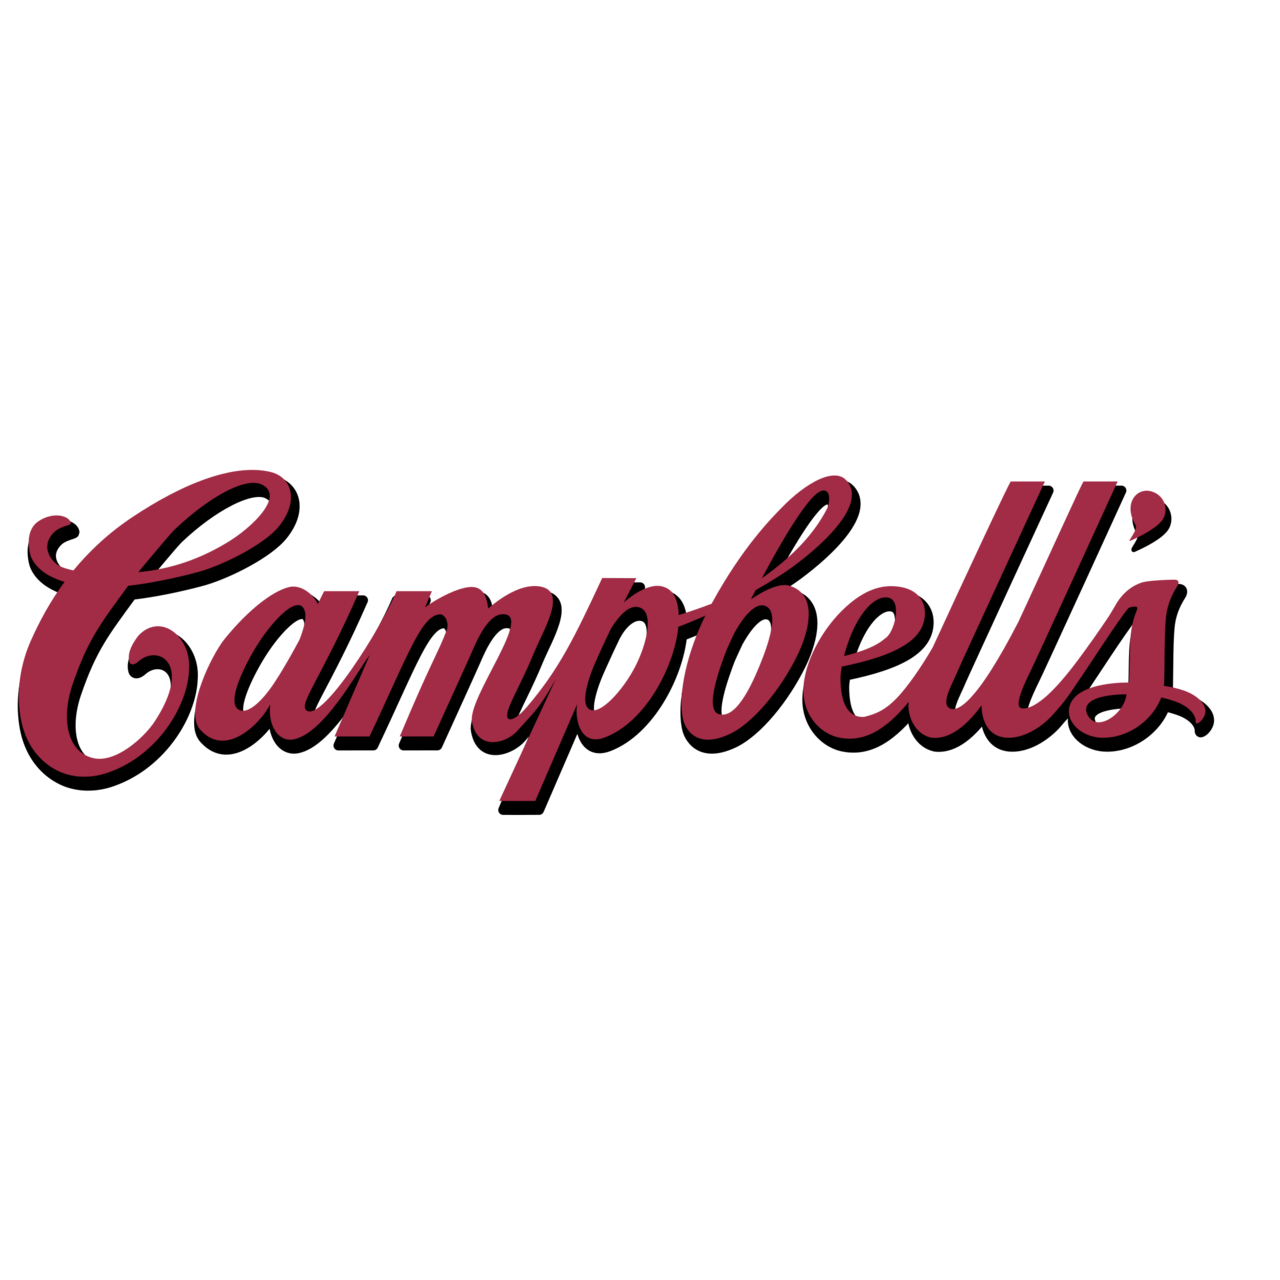 Campbell’s Logo PNG Images HD